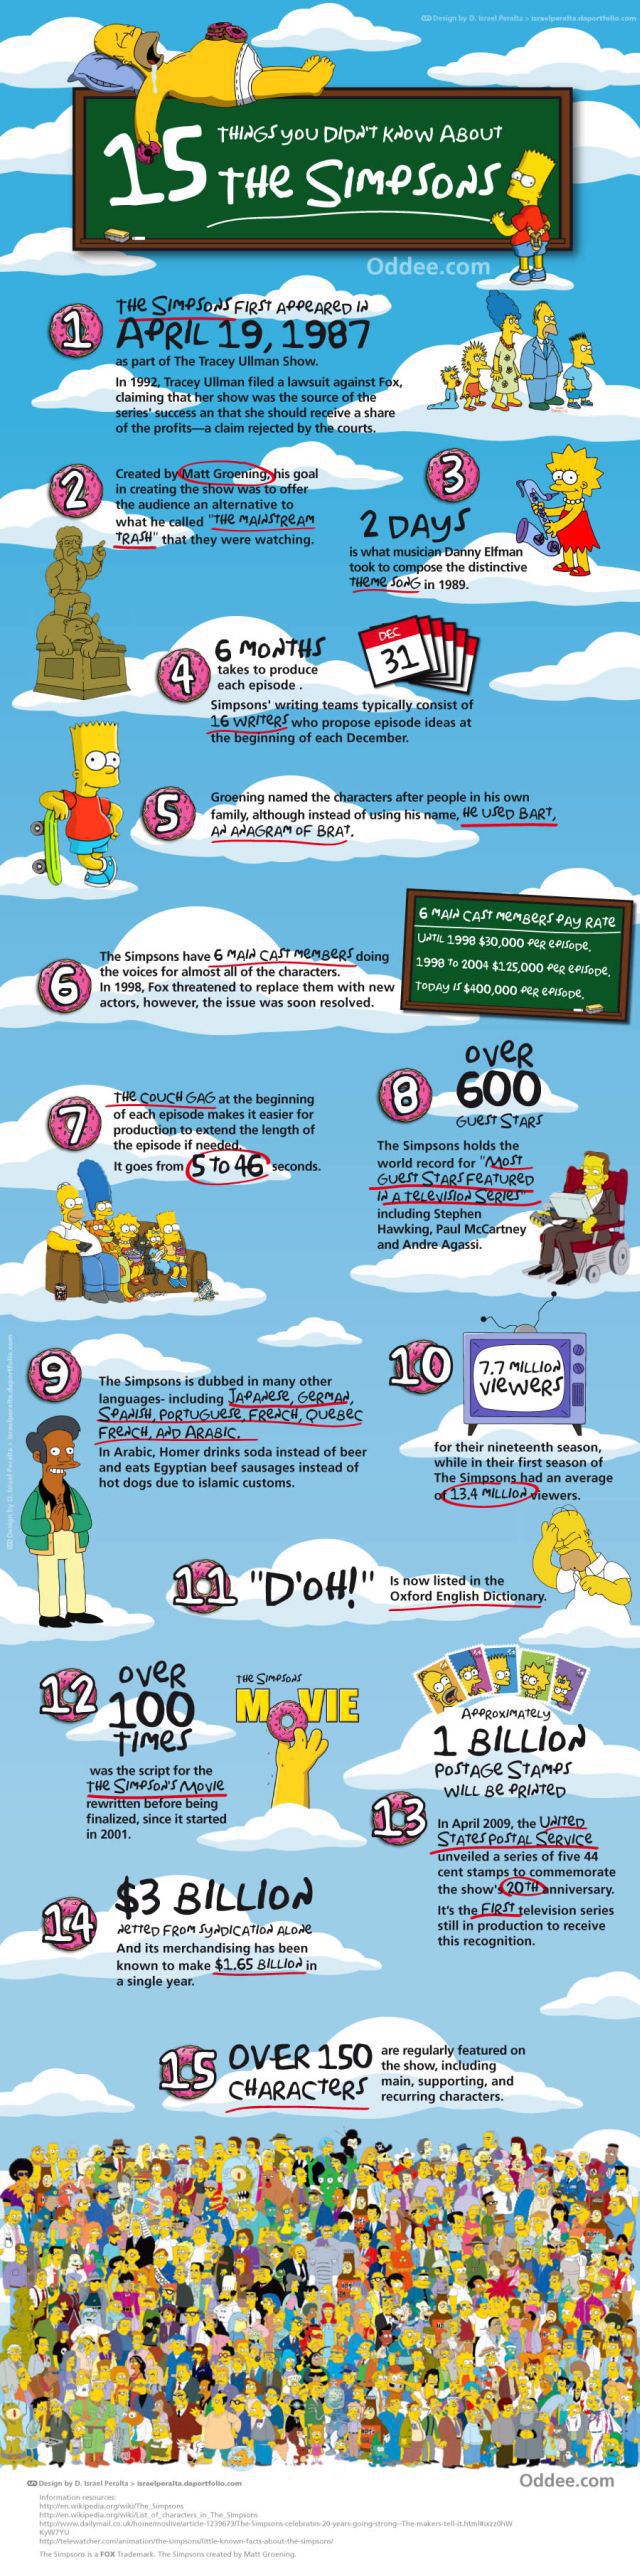 Things You Might Want to Know about the Simpsons (1 pic)